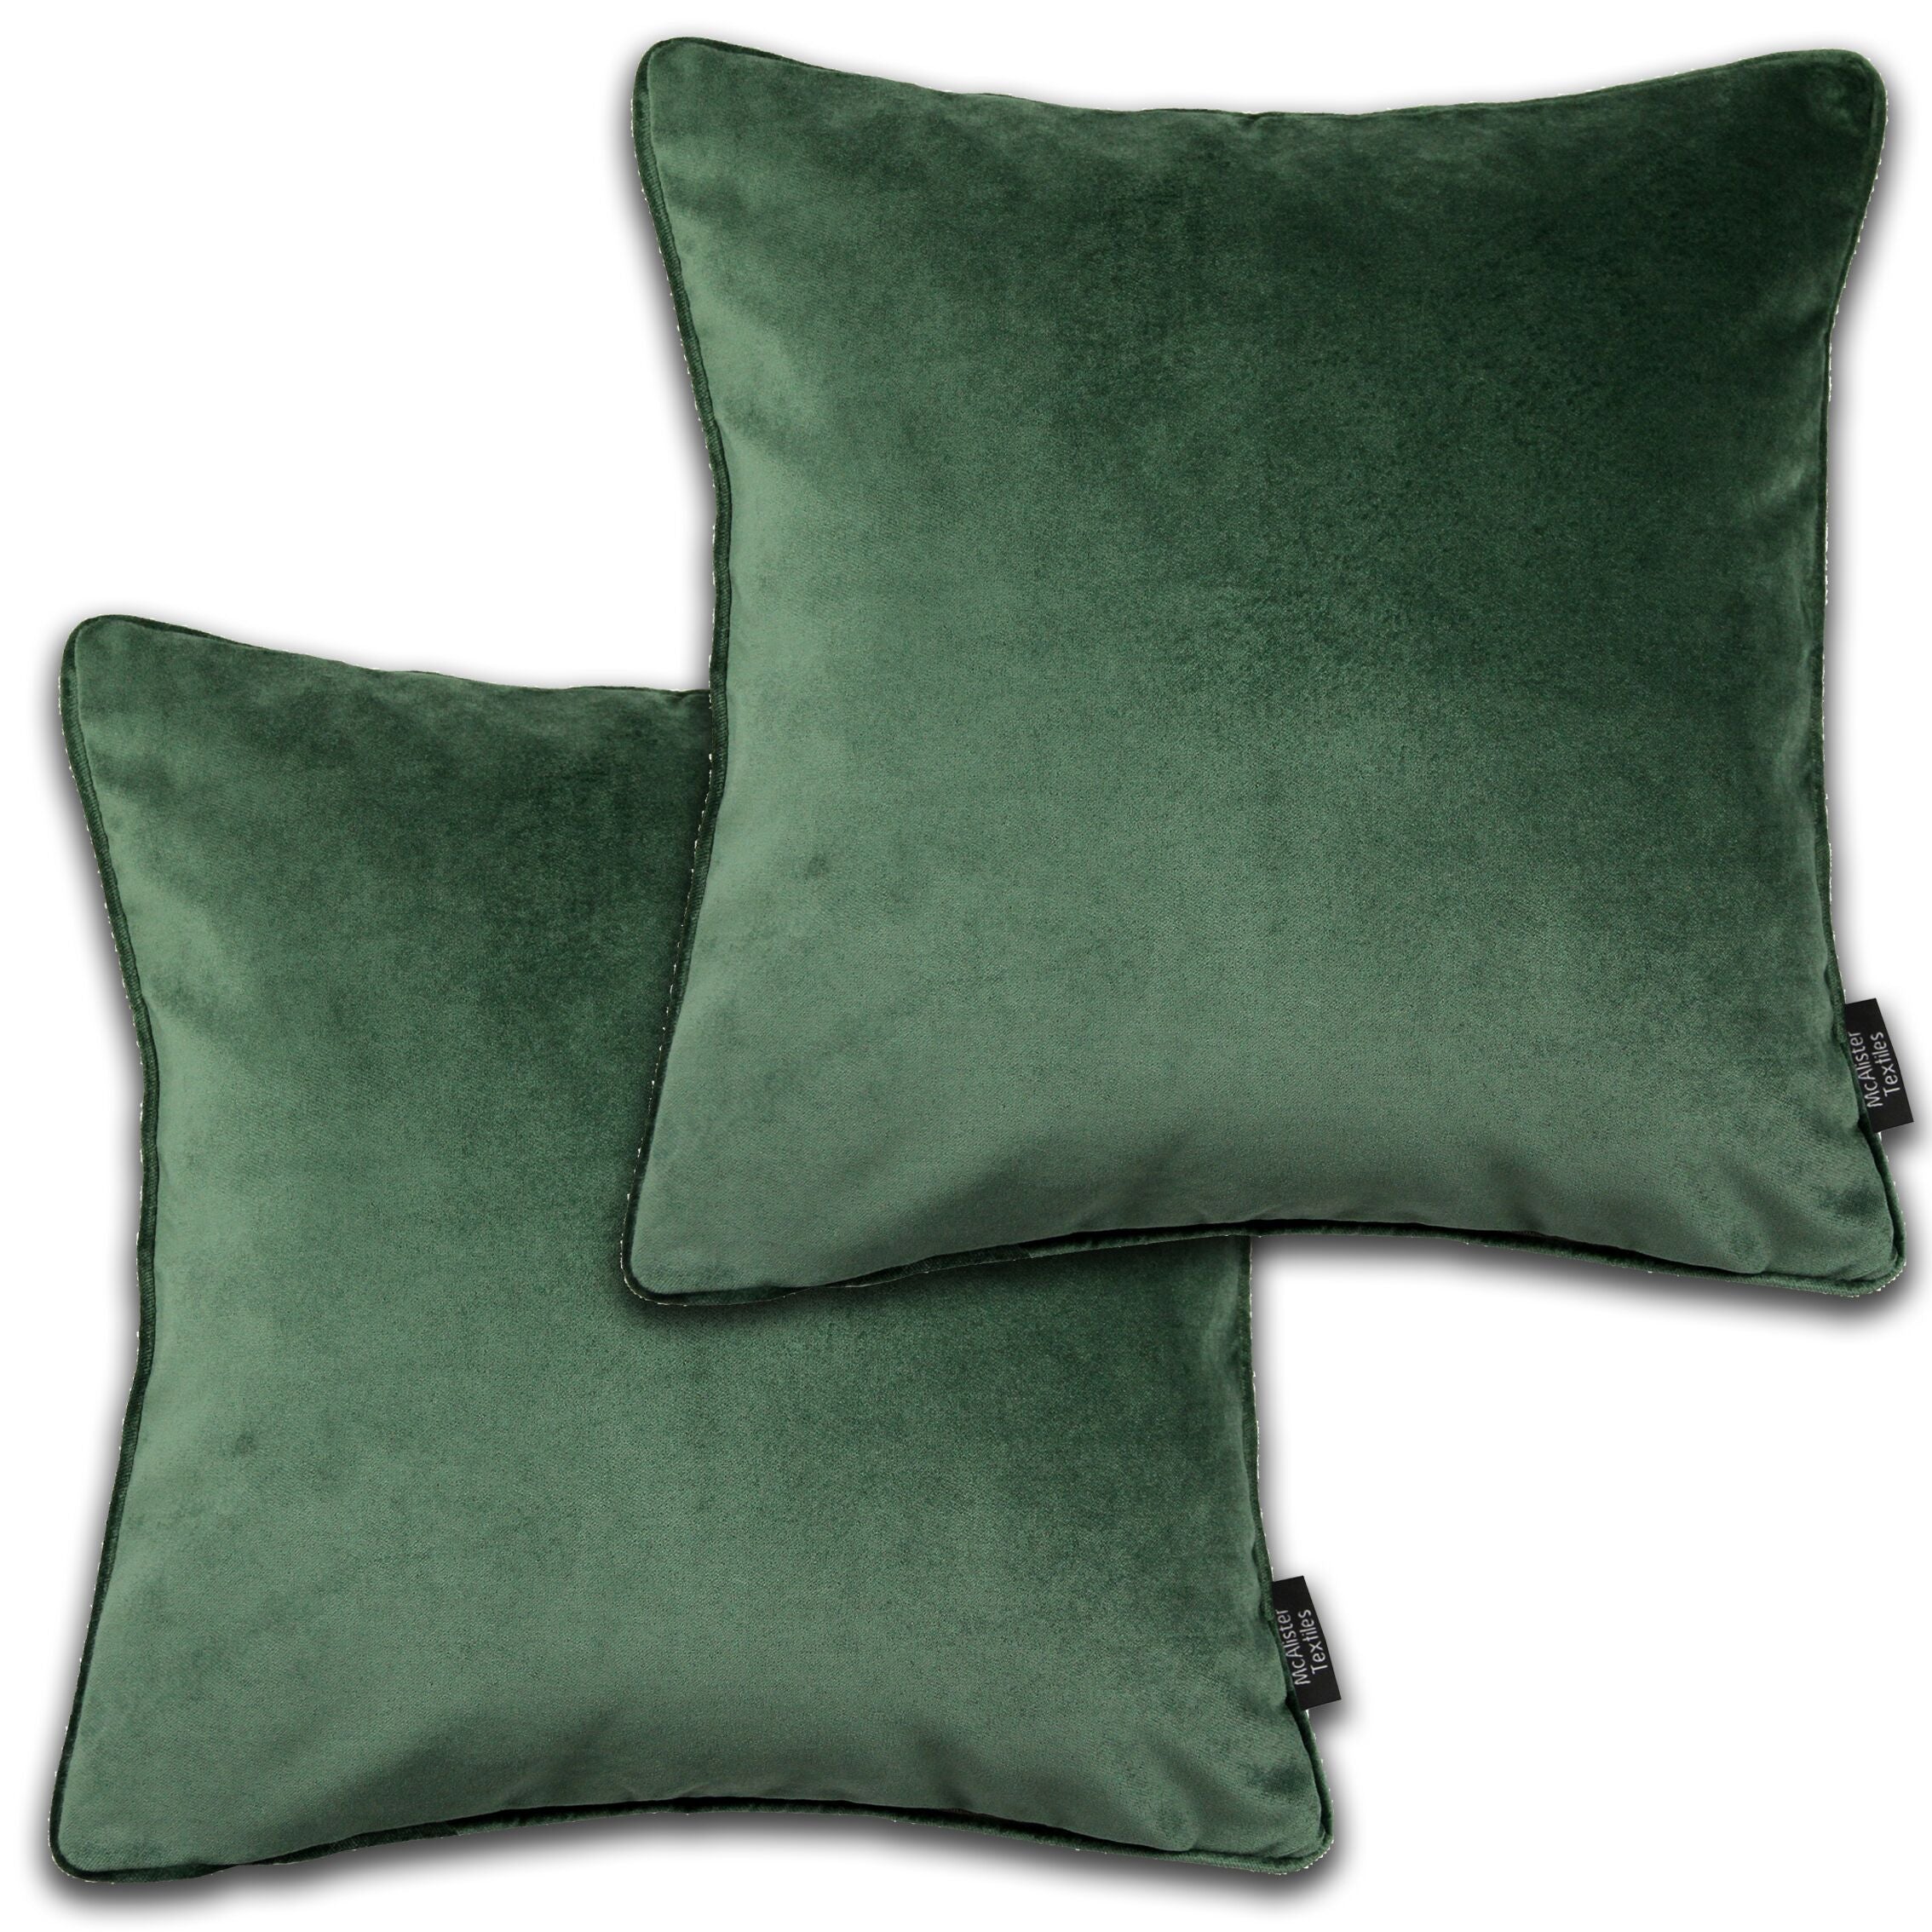 McAlister Textiles Matt Moss Green Velvet 43cm x 43cm Piped Cushion Sets Cushions and Covers Cushion Covers Set of 2 